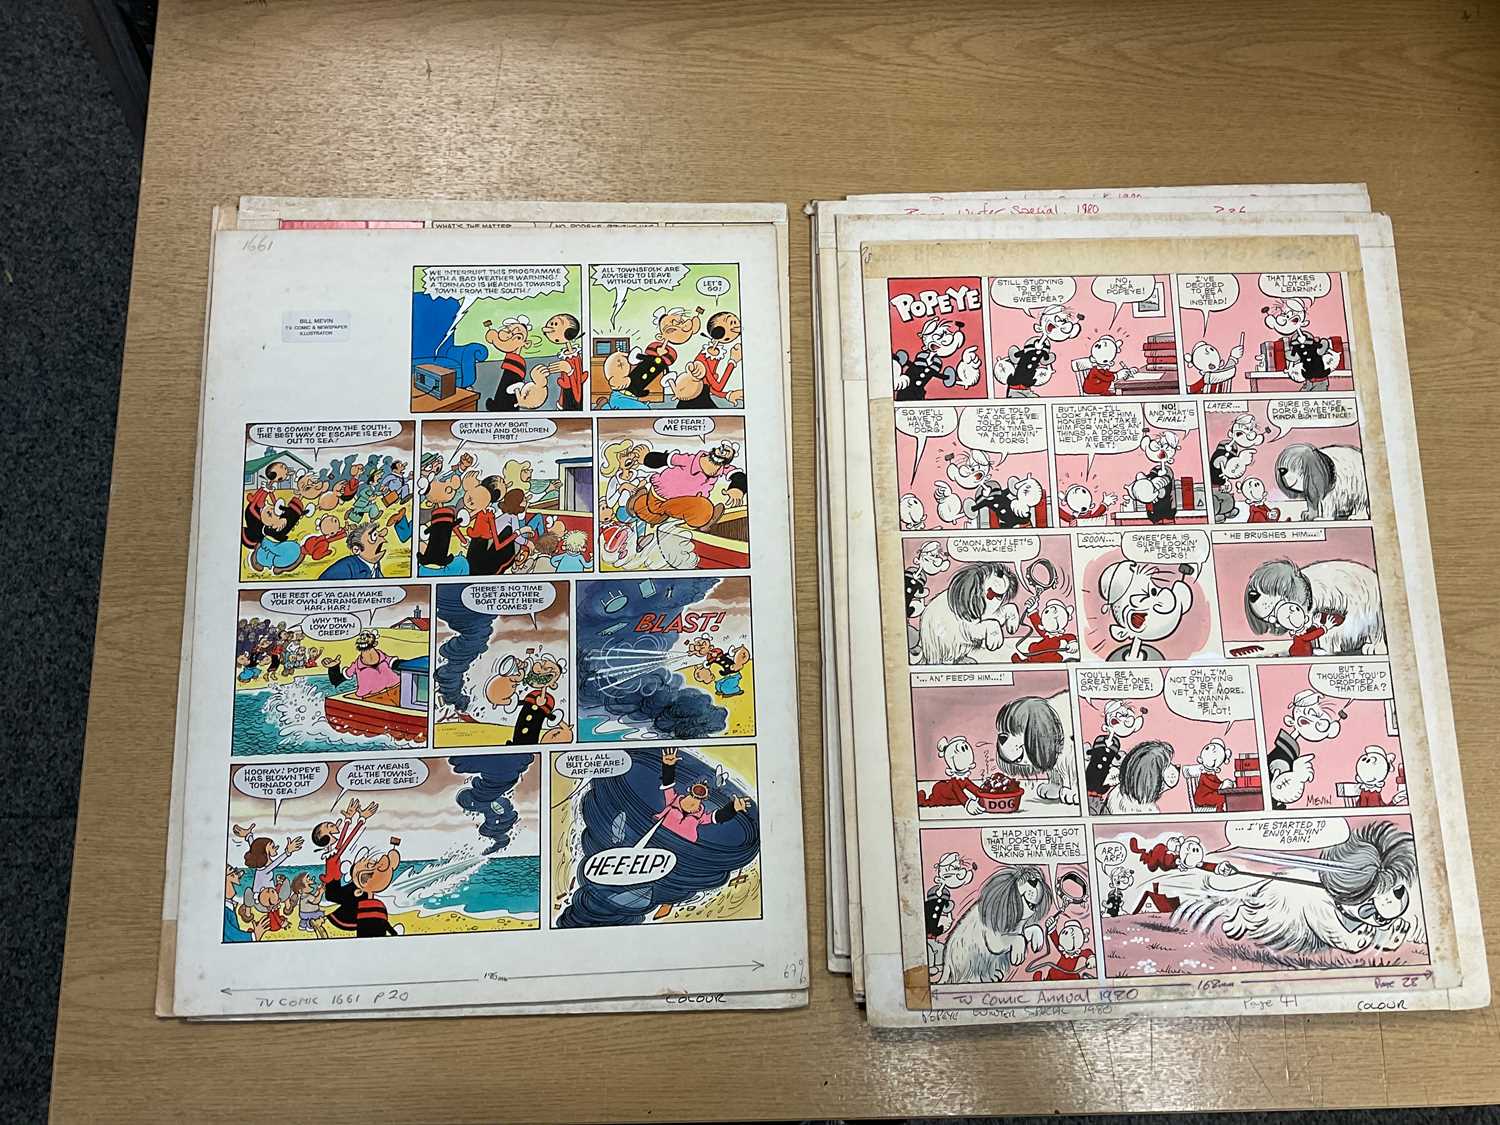 † BILL MEVIN; ten original storyboard cartoons for Popeye, some with annotated detail. Condition - Image 6 of 7